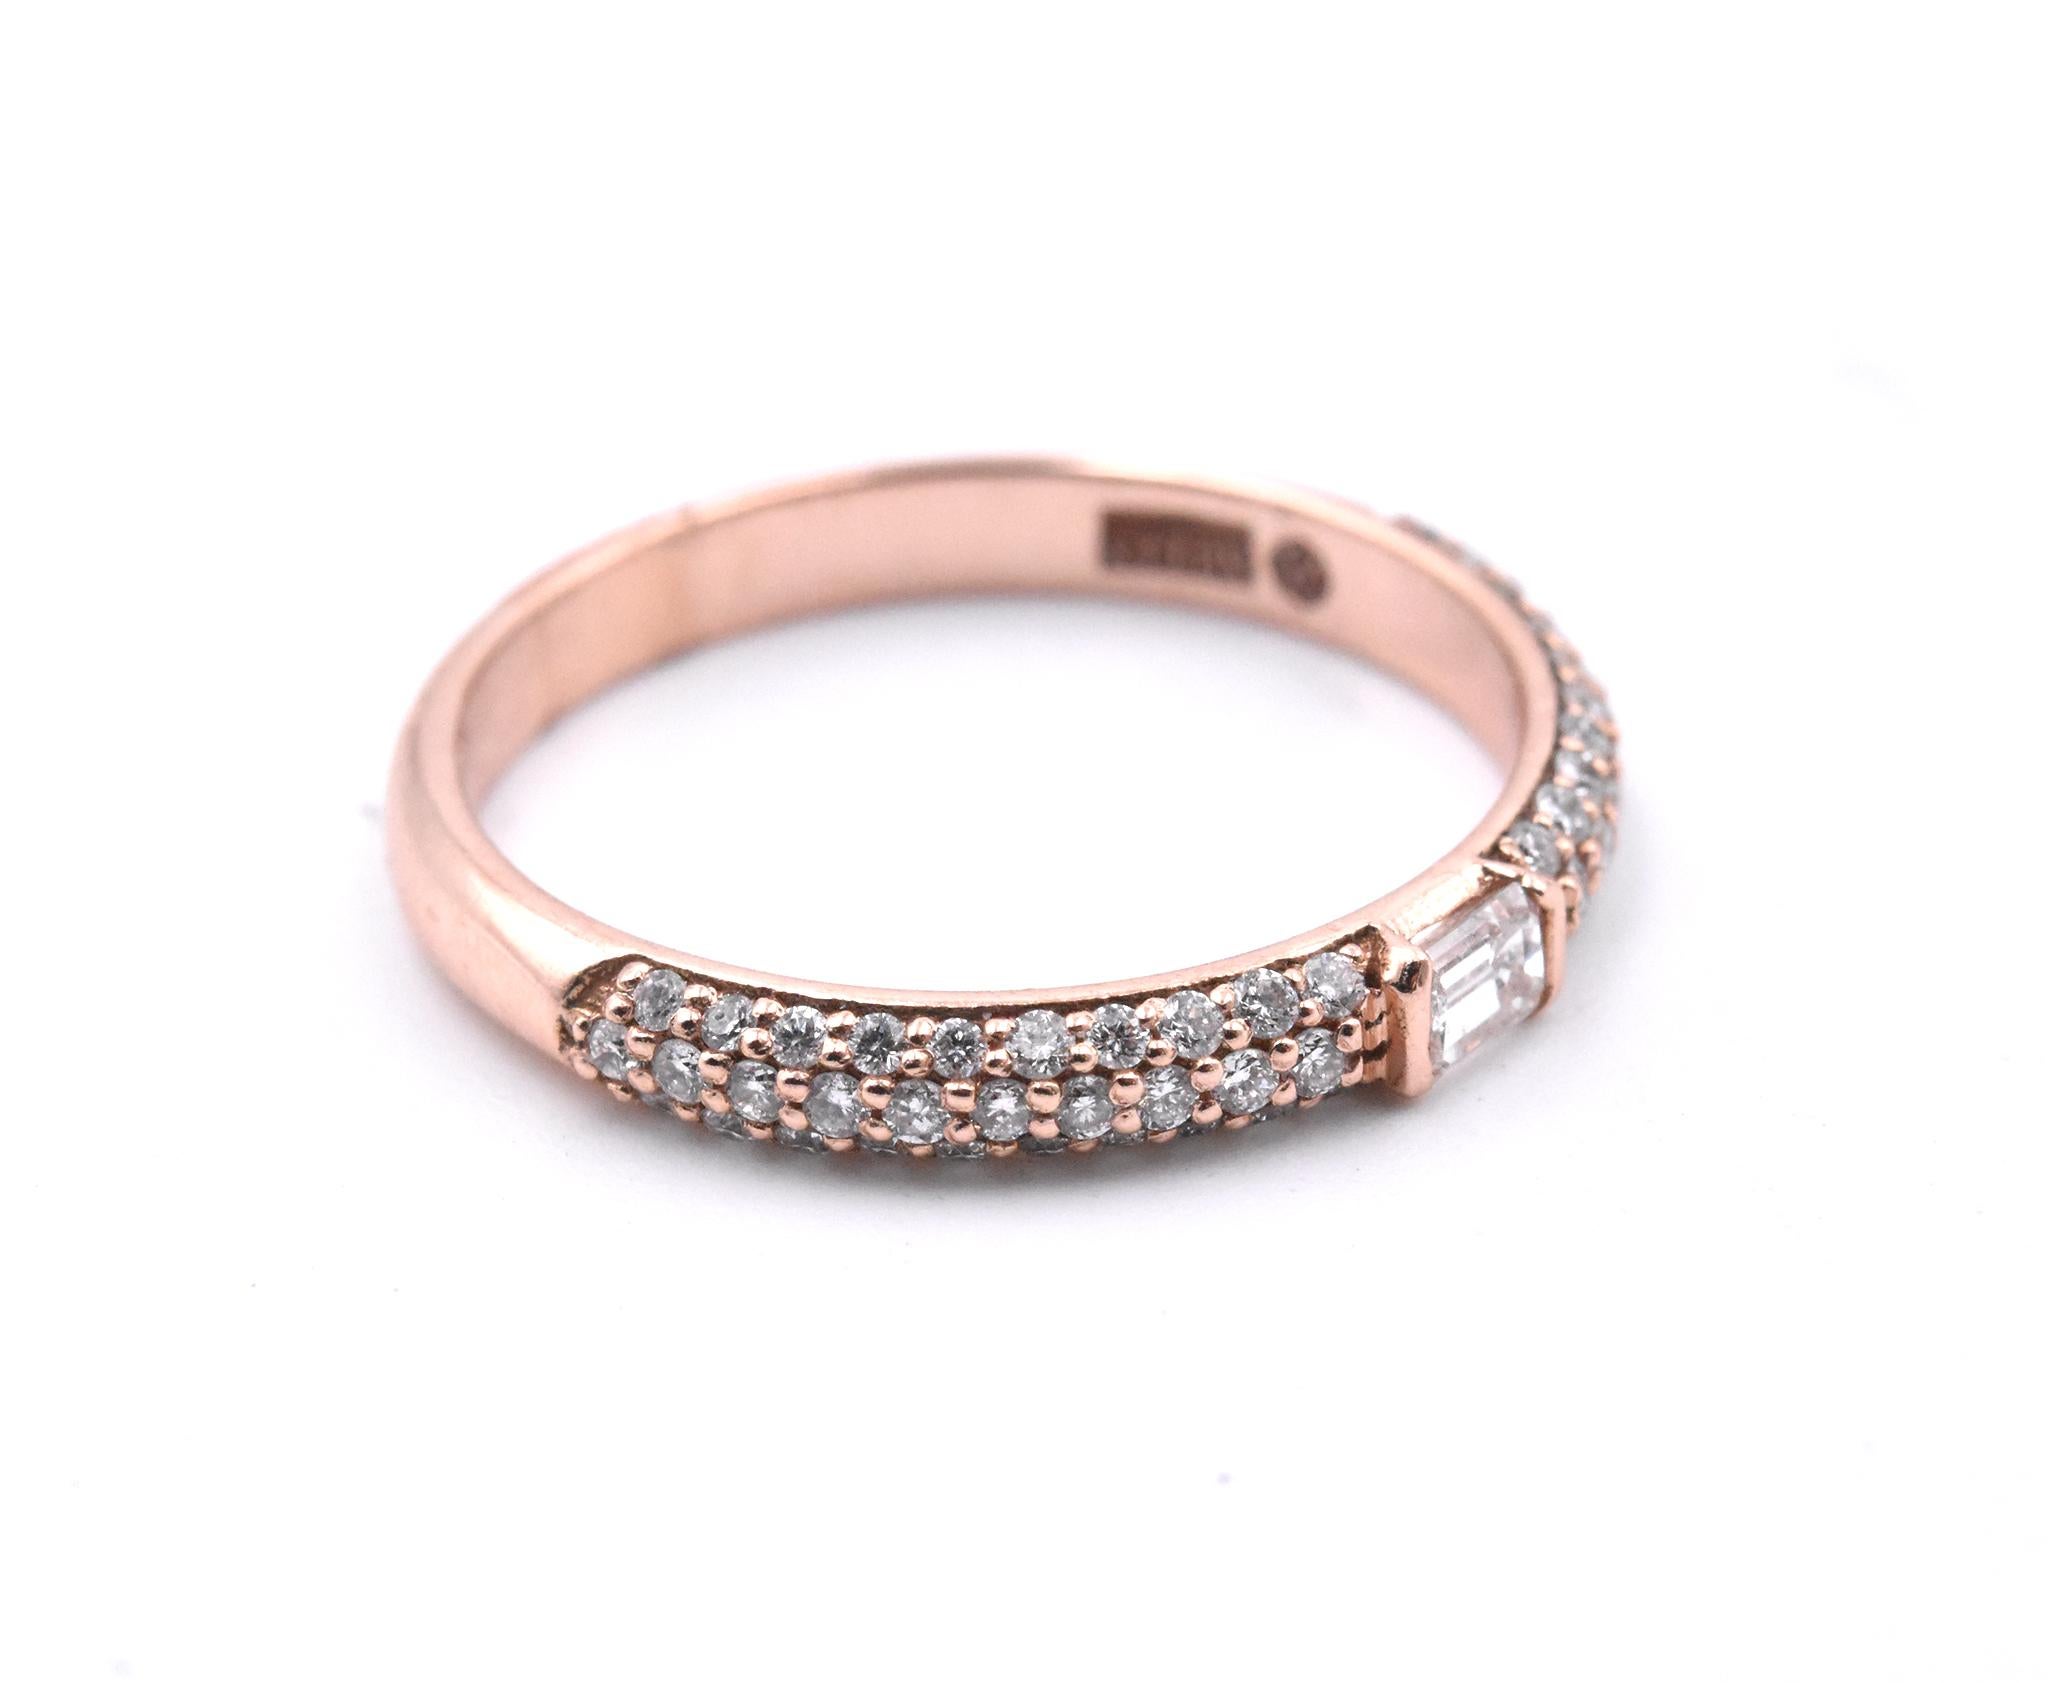 Designer: The Estate Watch and Jewelry
Material: 14k rose gold
Center Diamond: 1 emerald cut diamond = 0.13cttw
Diamonds: pave set diamonds = 0.30cttw
Size: 6 ½ (please allow two additional shipping days for sizing requests)  
Dimensions: ring